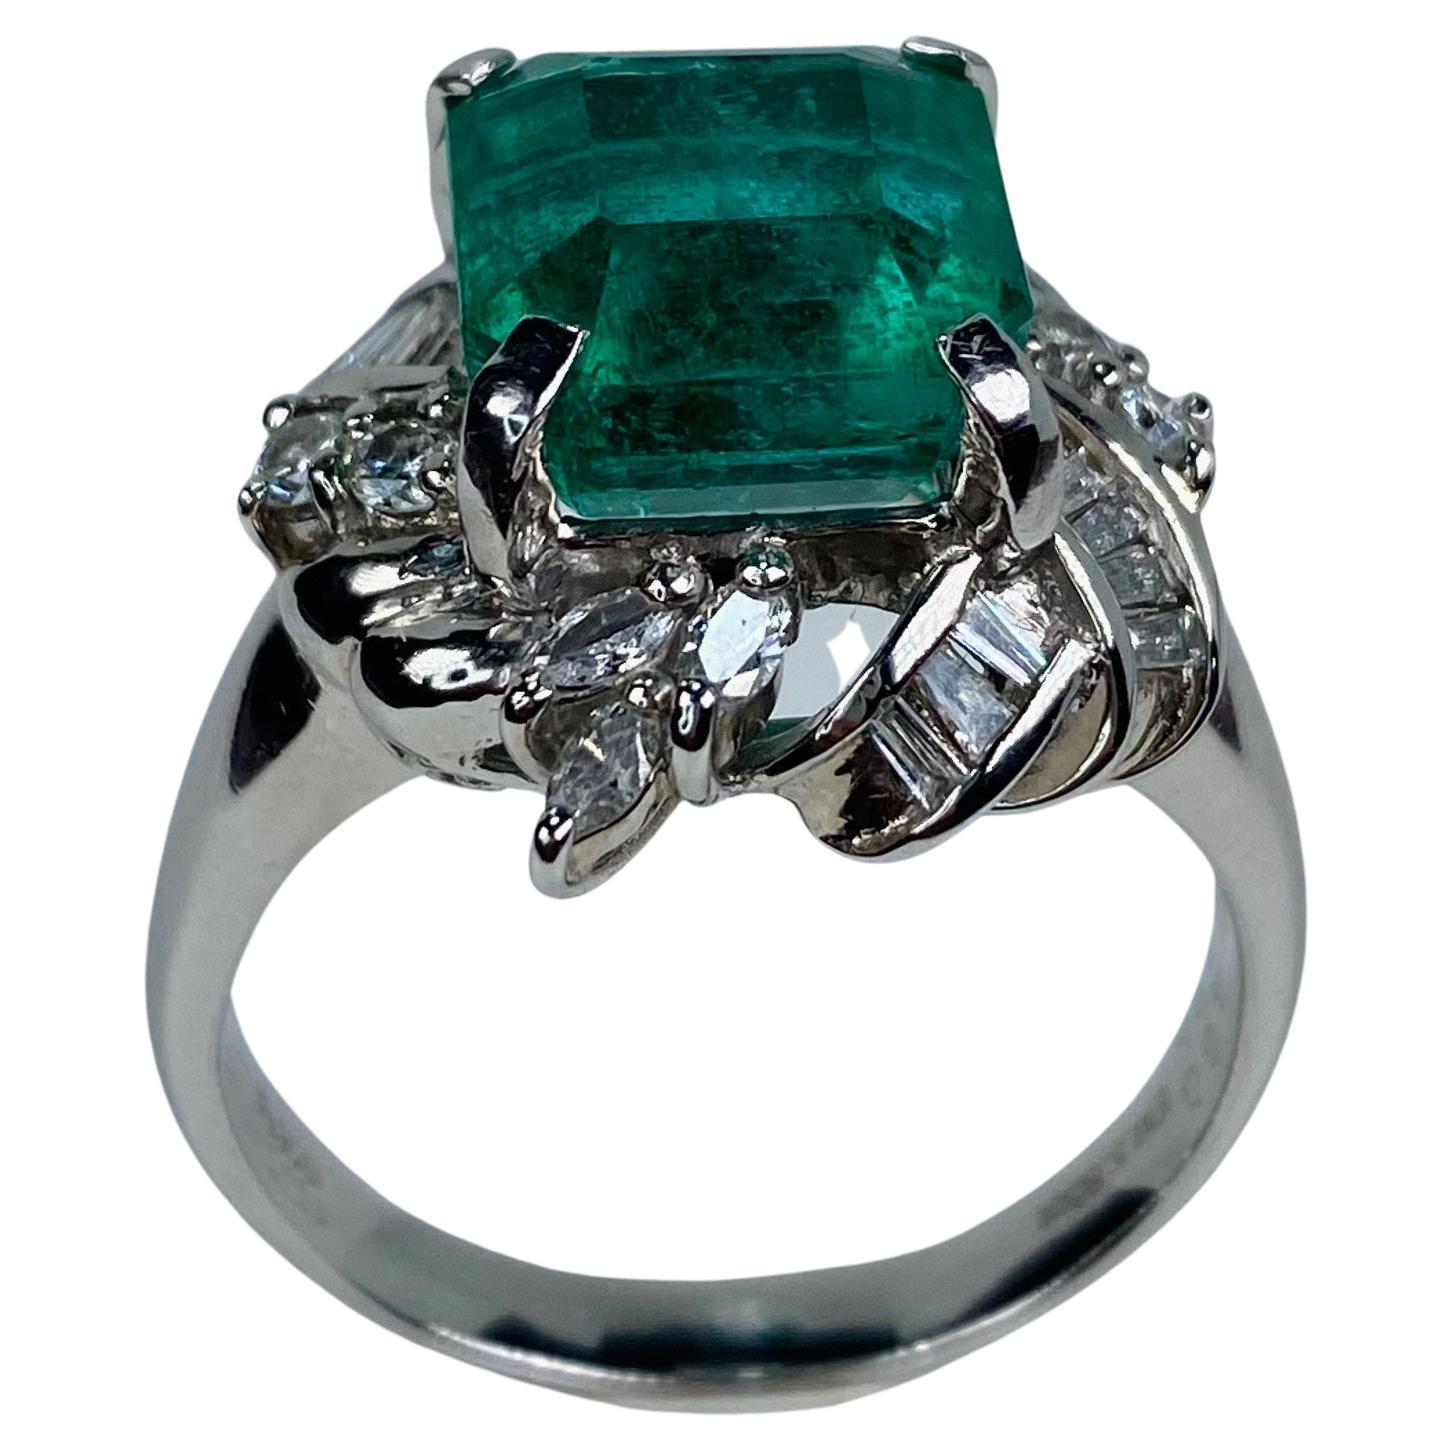 The Sapphire Merchant presents this exquisite one-of-a-kind 5.80ct Zambian Emerald ring to the 1stDibs platform. This ring is a true marvel, set with platinum and complimented with a mixture of marquise, round brilliant, and baguette diamonds. With